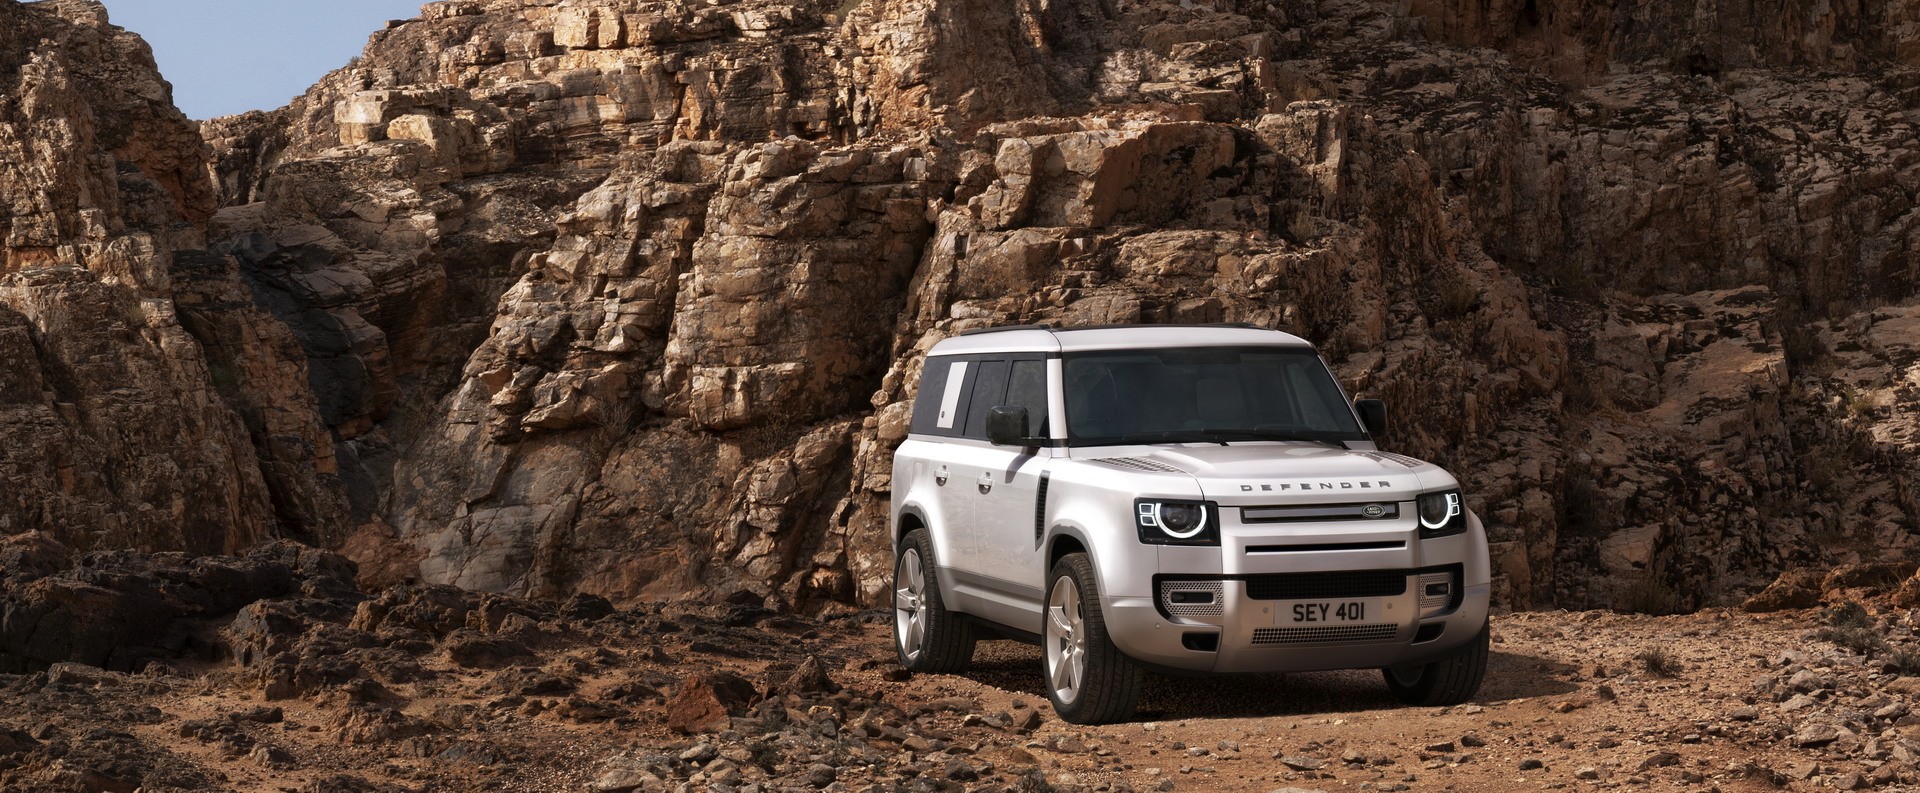 New all-electric Land Rover Defender on the way with 300-mile range